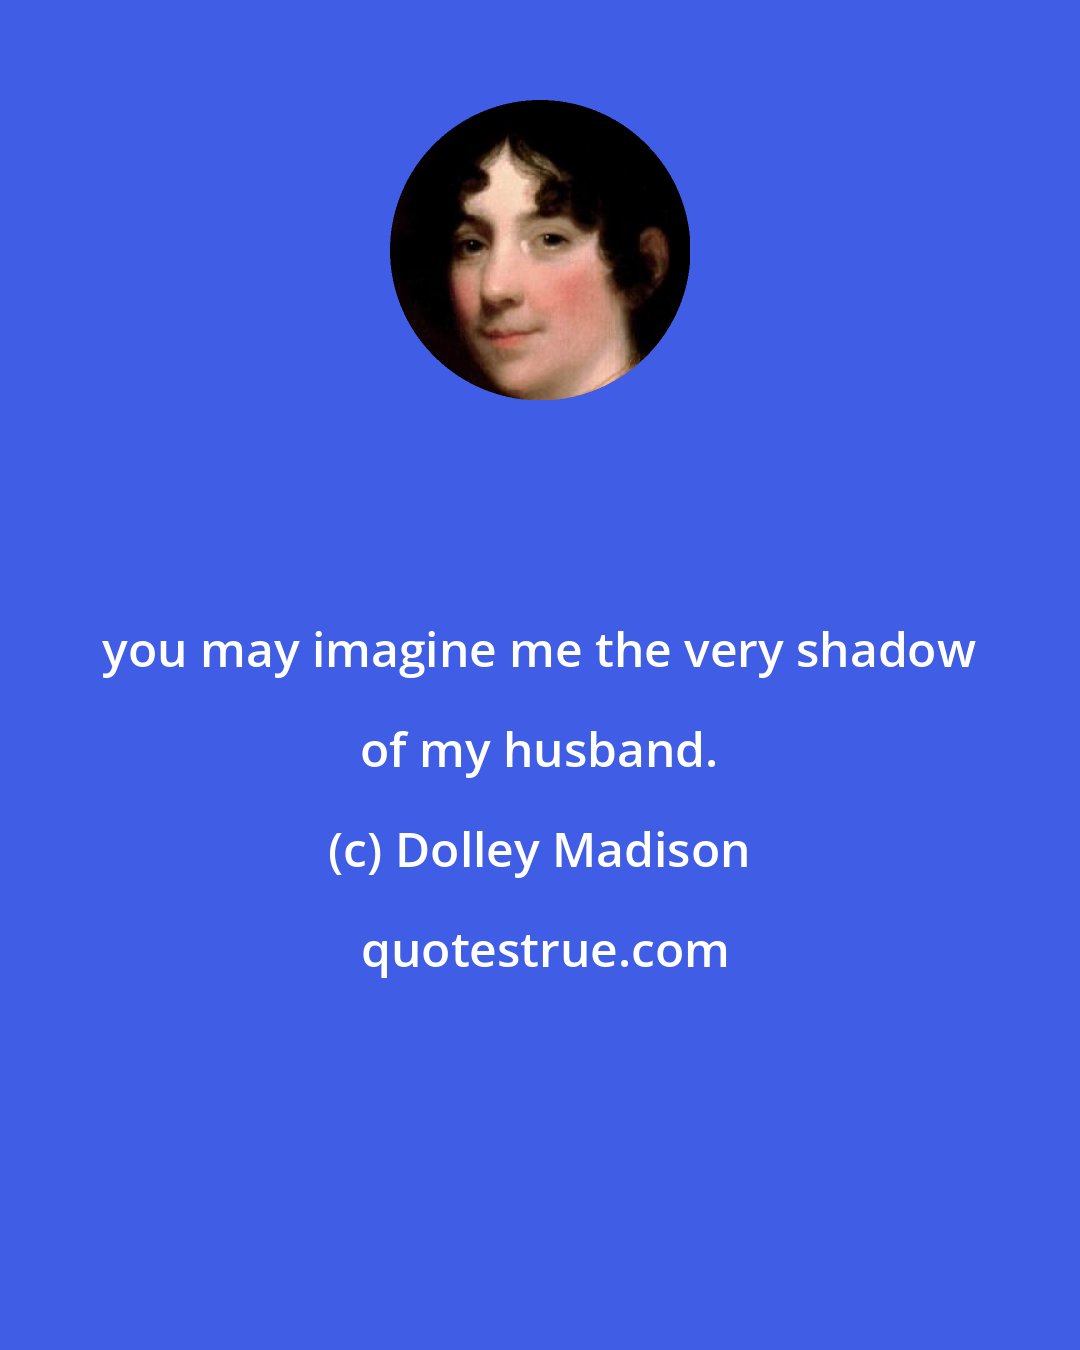 Dolley Madison: you may imagine me the very shadow of my husband.